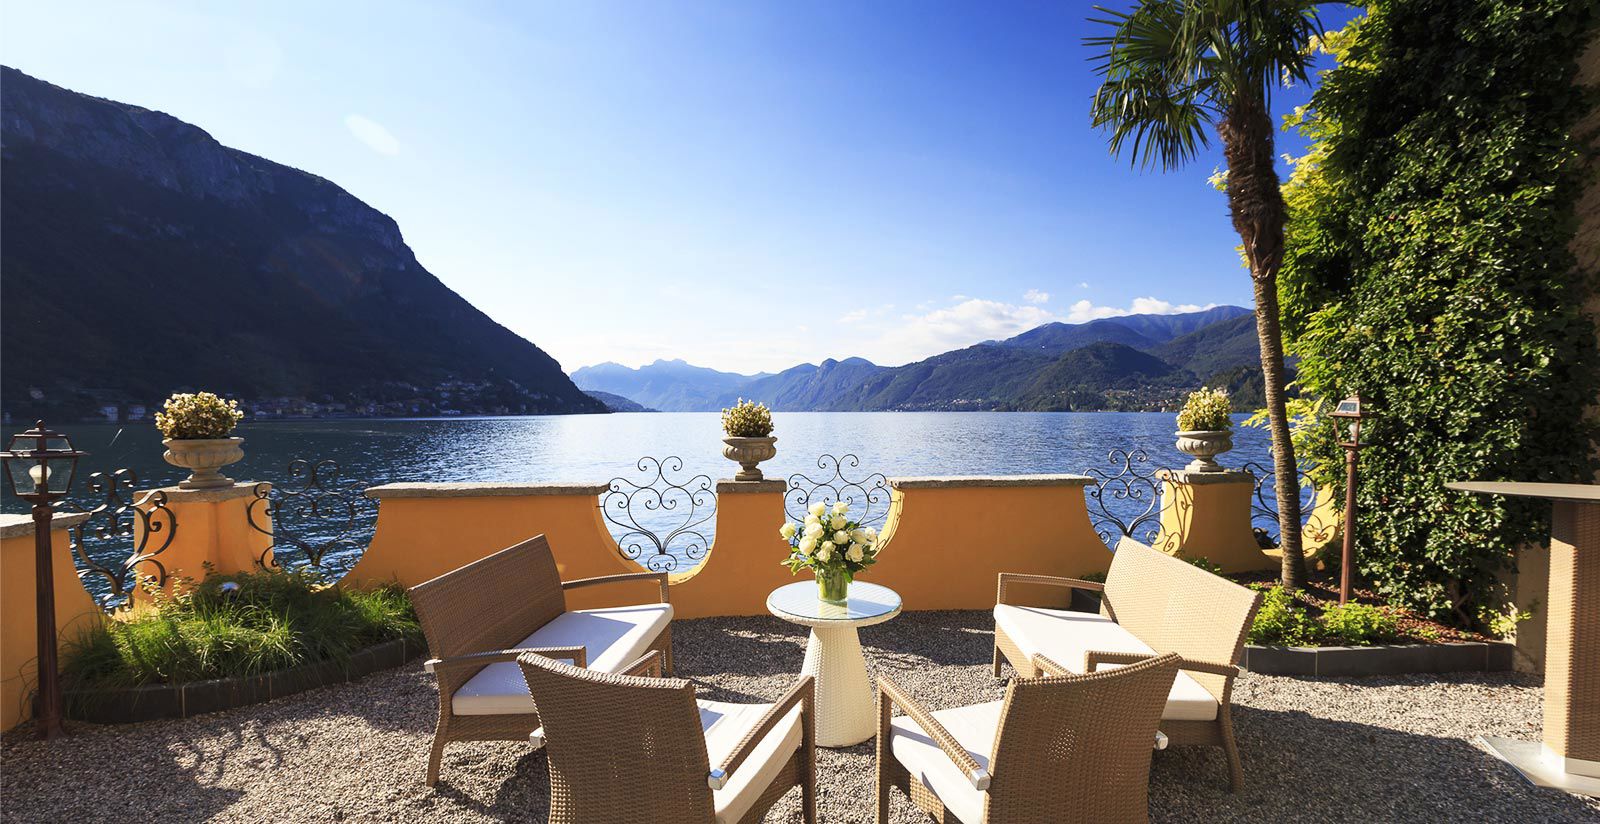 Hotel Royal Victoria - 4-star hotel for couples on Lake Como 4